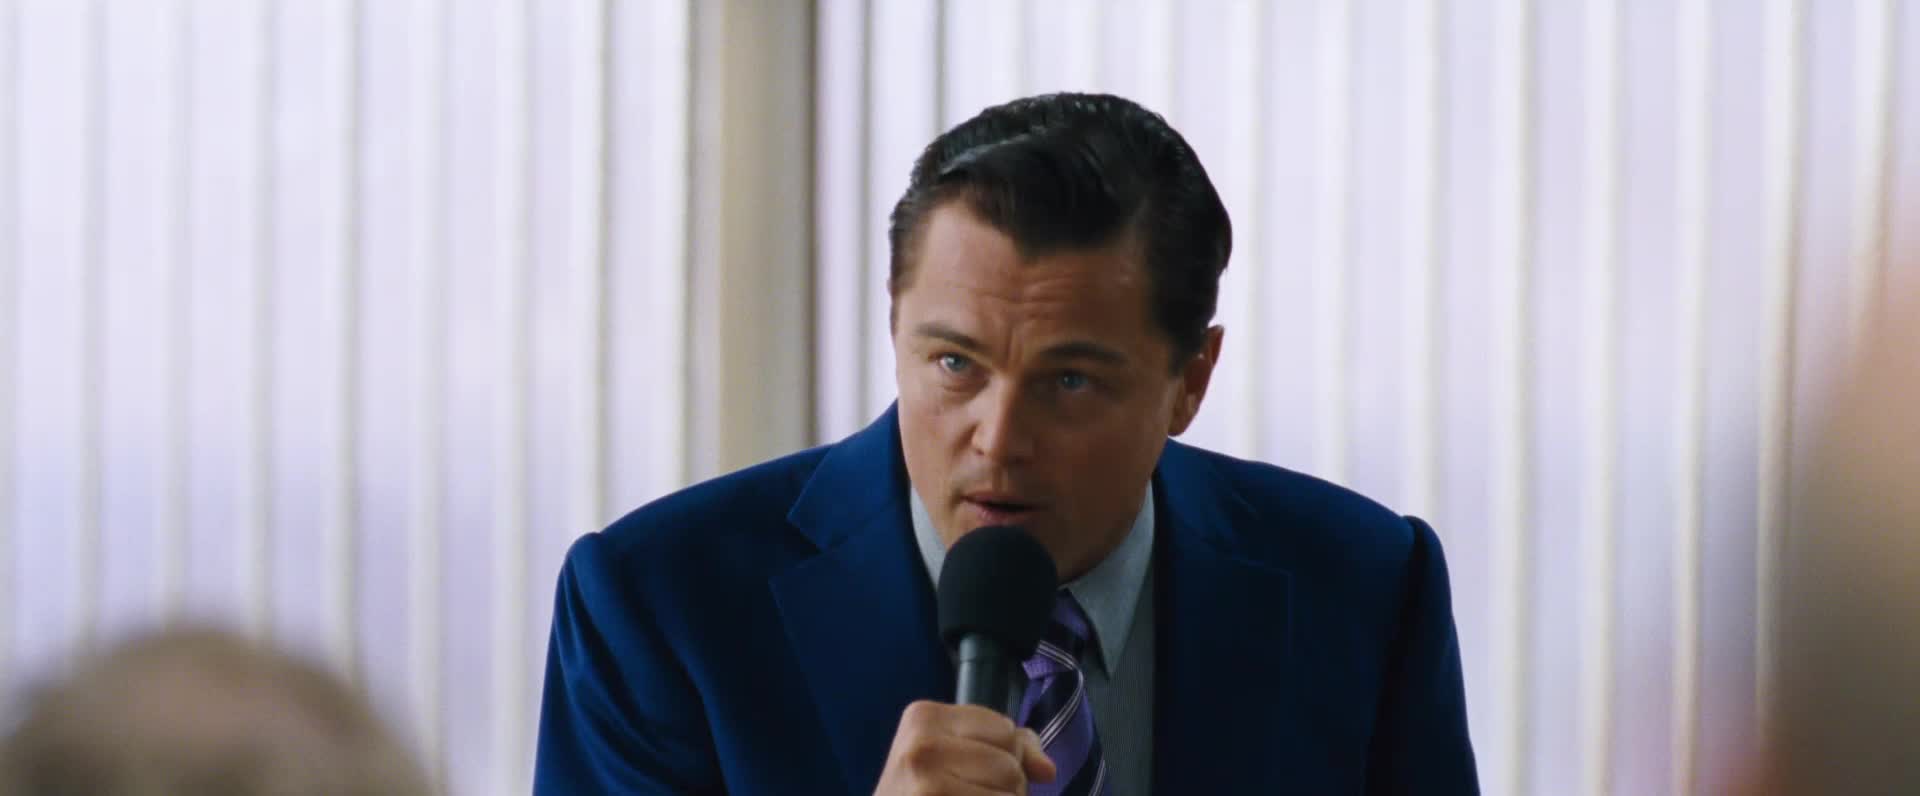 Wolf Of Wall Street online